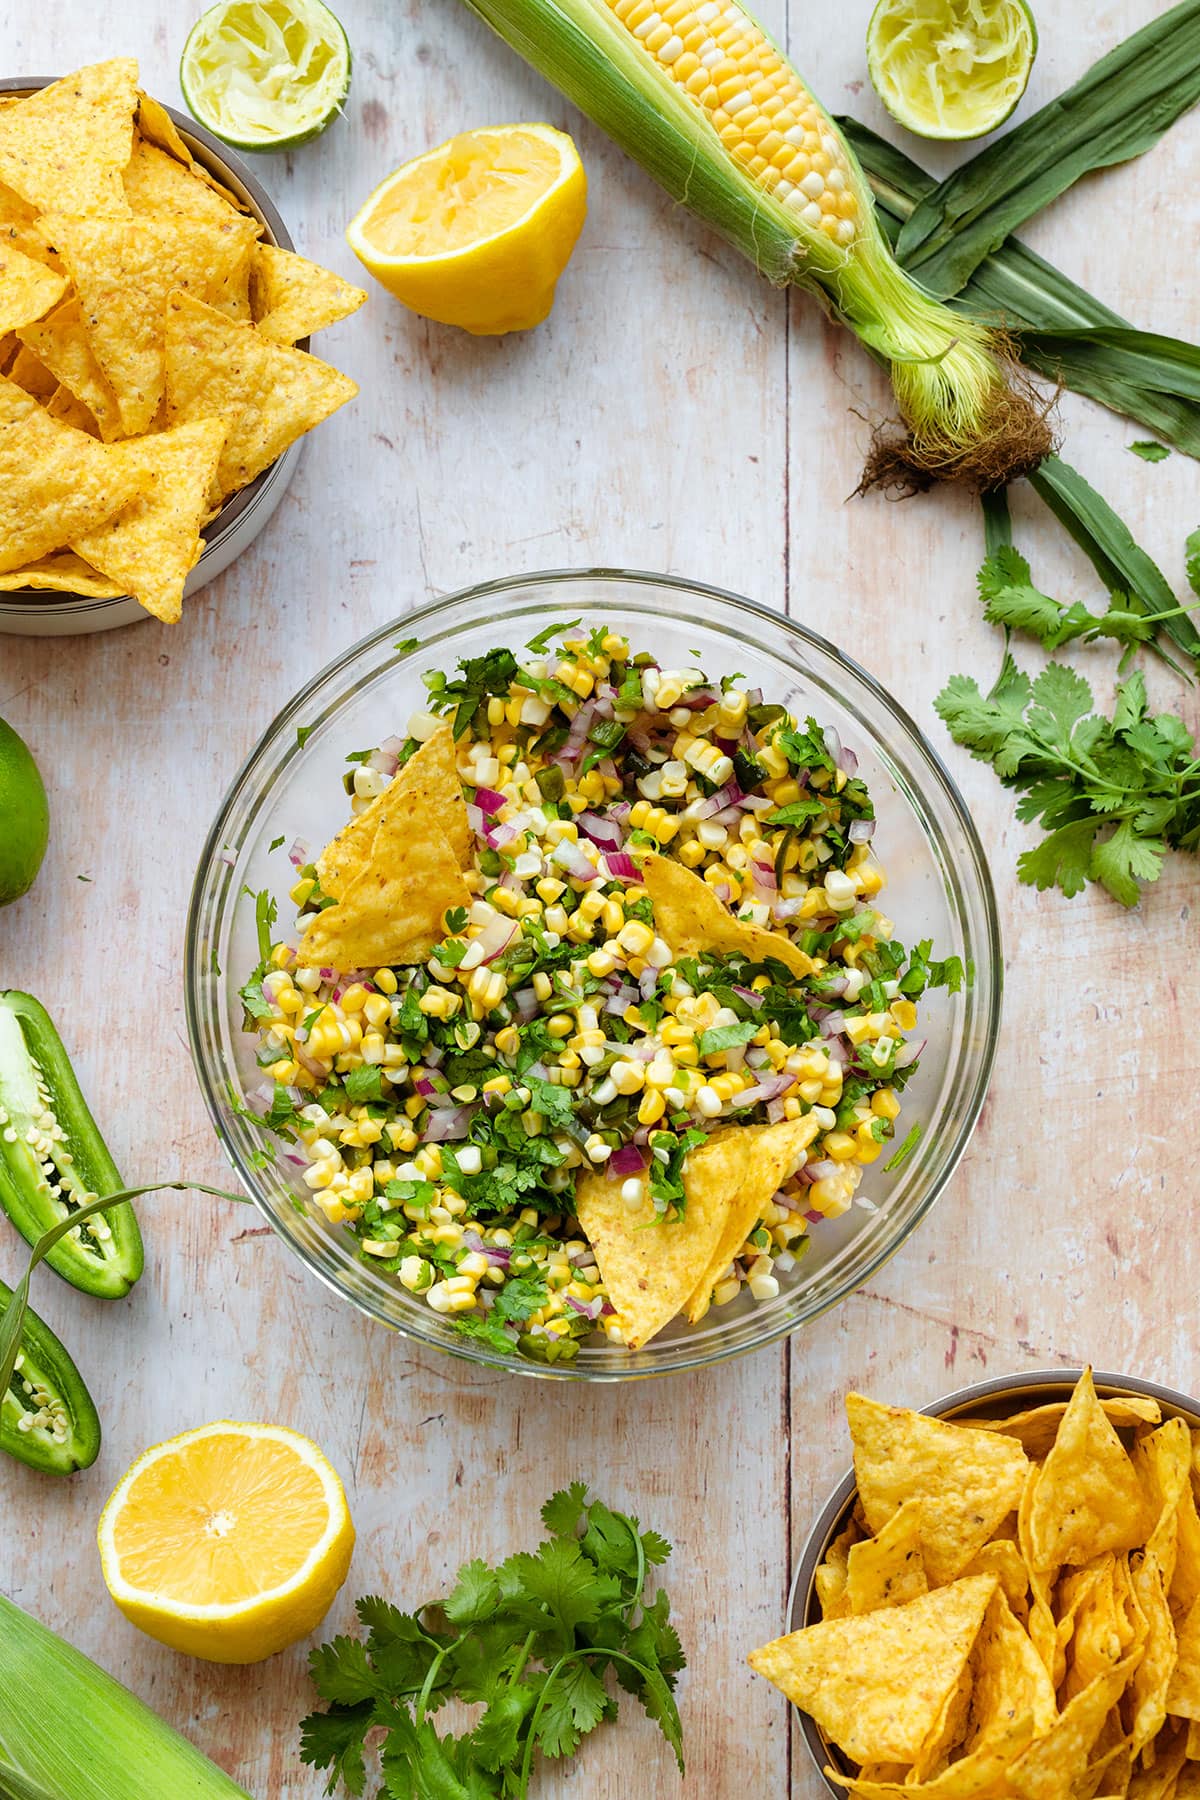 Corn salsa in a glass bowl with tortilla chips dipped in. There are more tortilla chips, fresh cilantro, corn, and jalapenos around. All on a light wooden background.